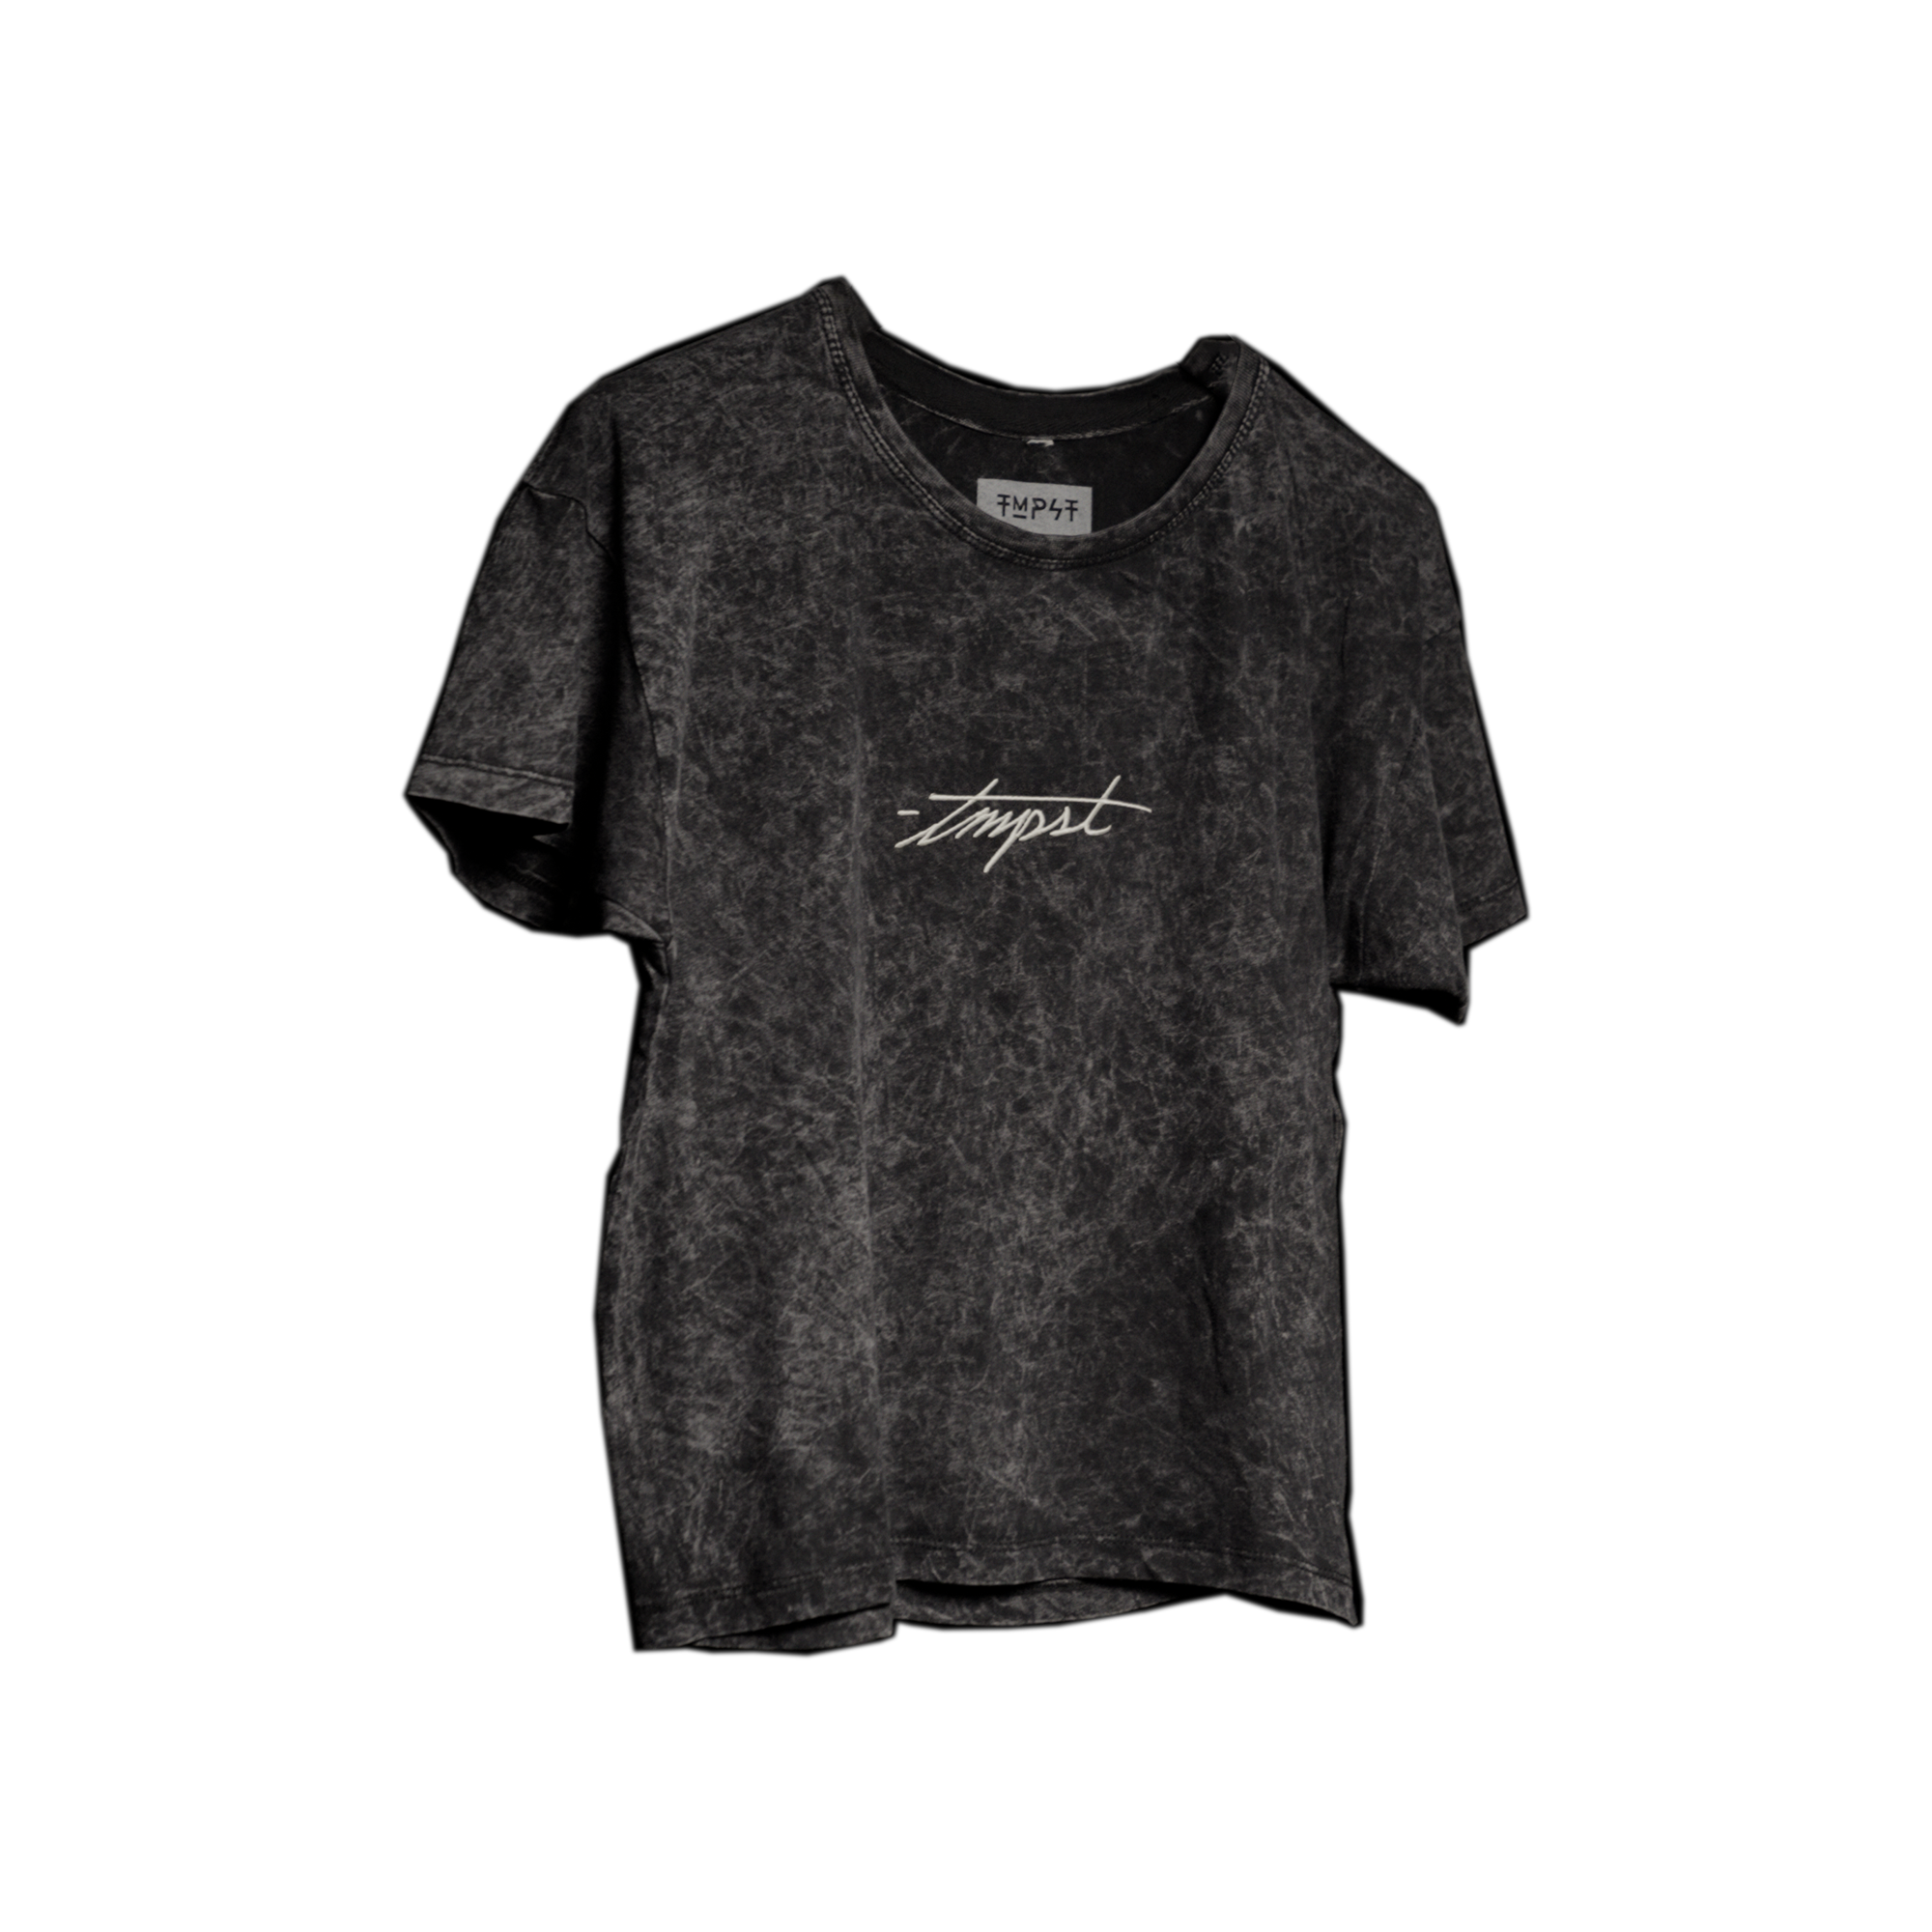 Mineral Wash Tee (Oversized)